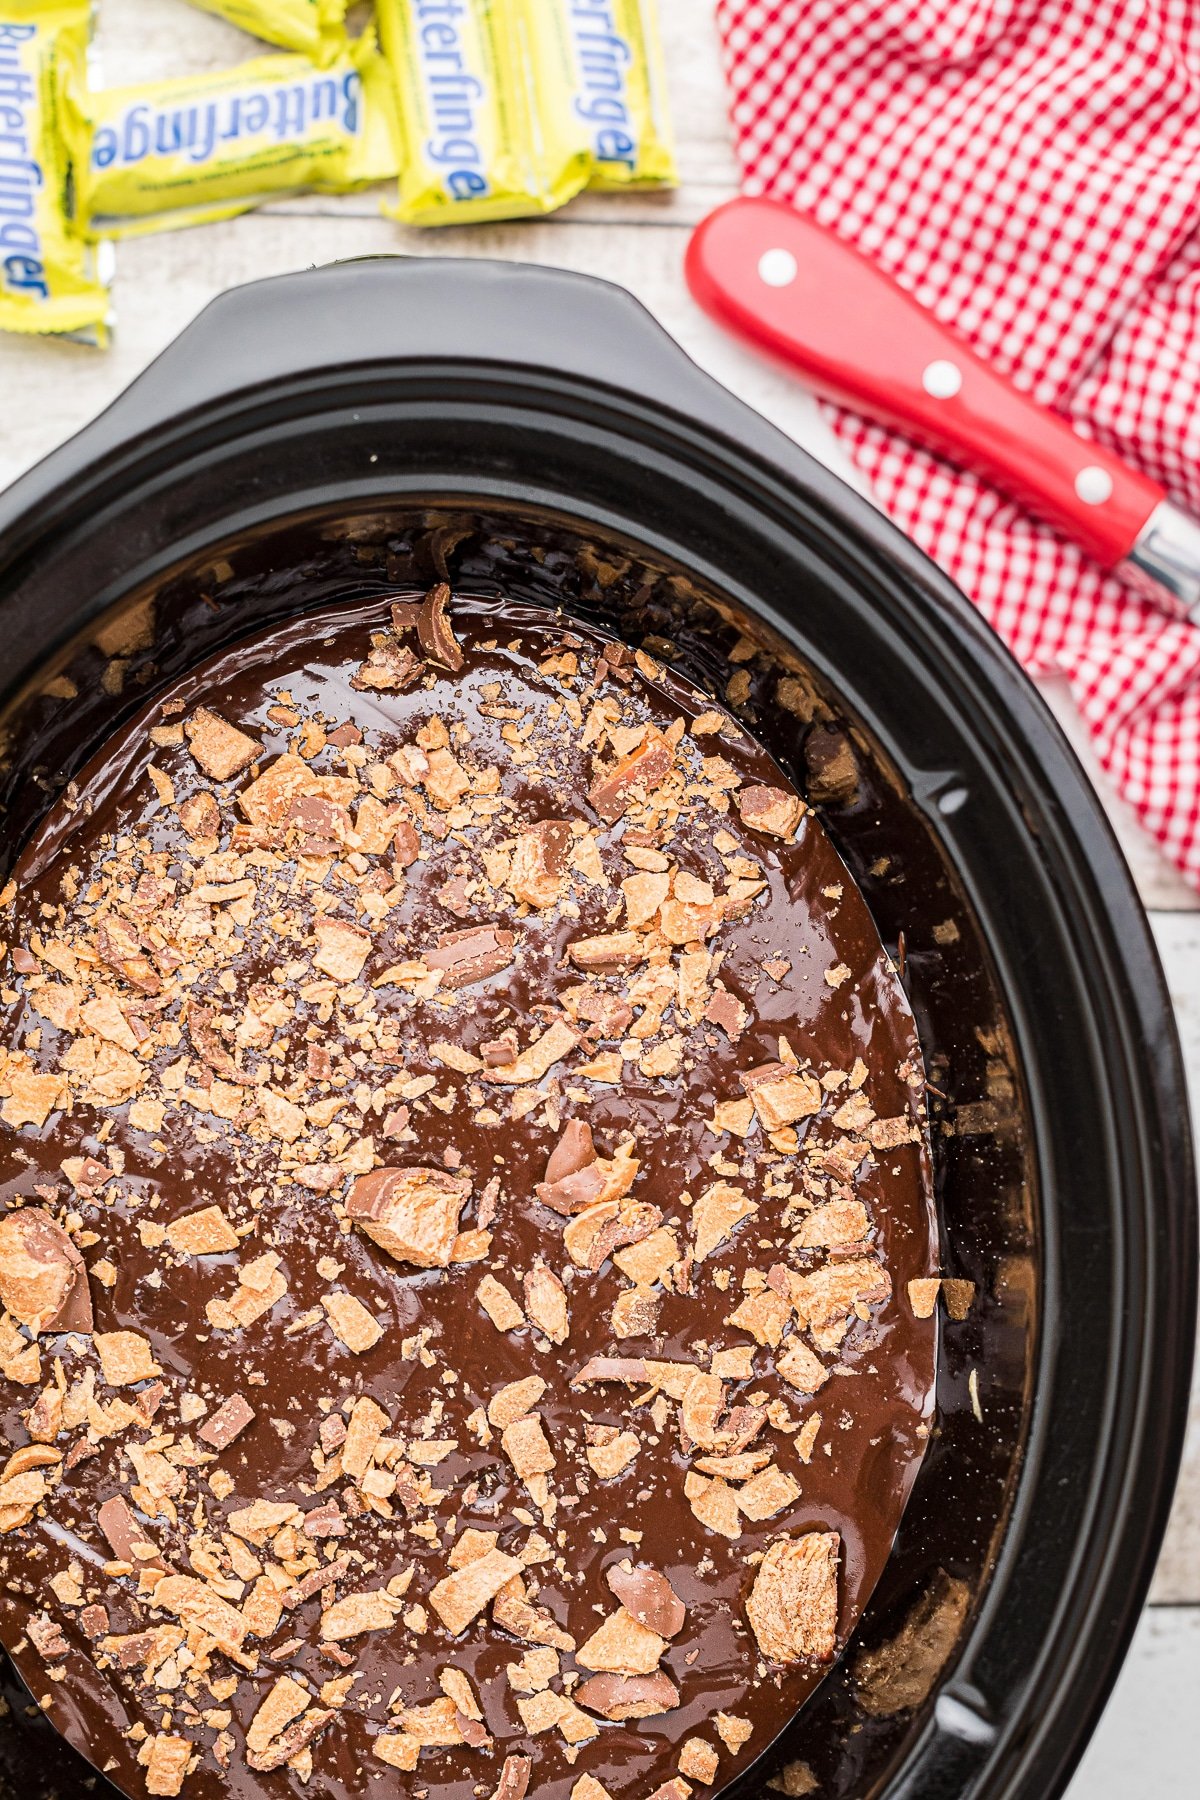 butterfinger cake in slow cooker with hot fudge topping.